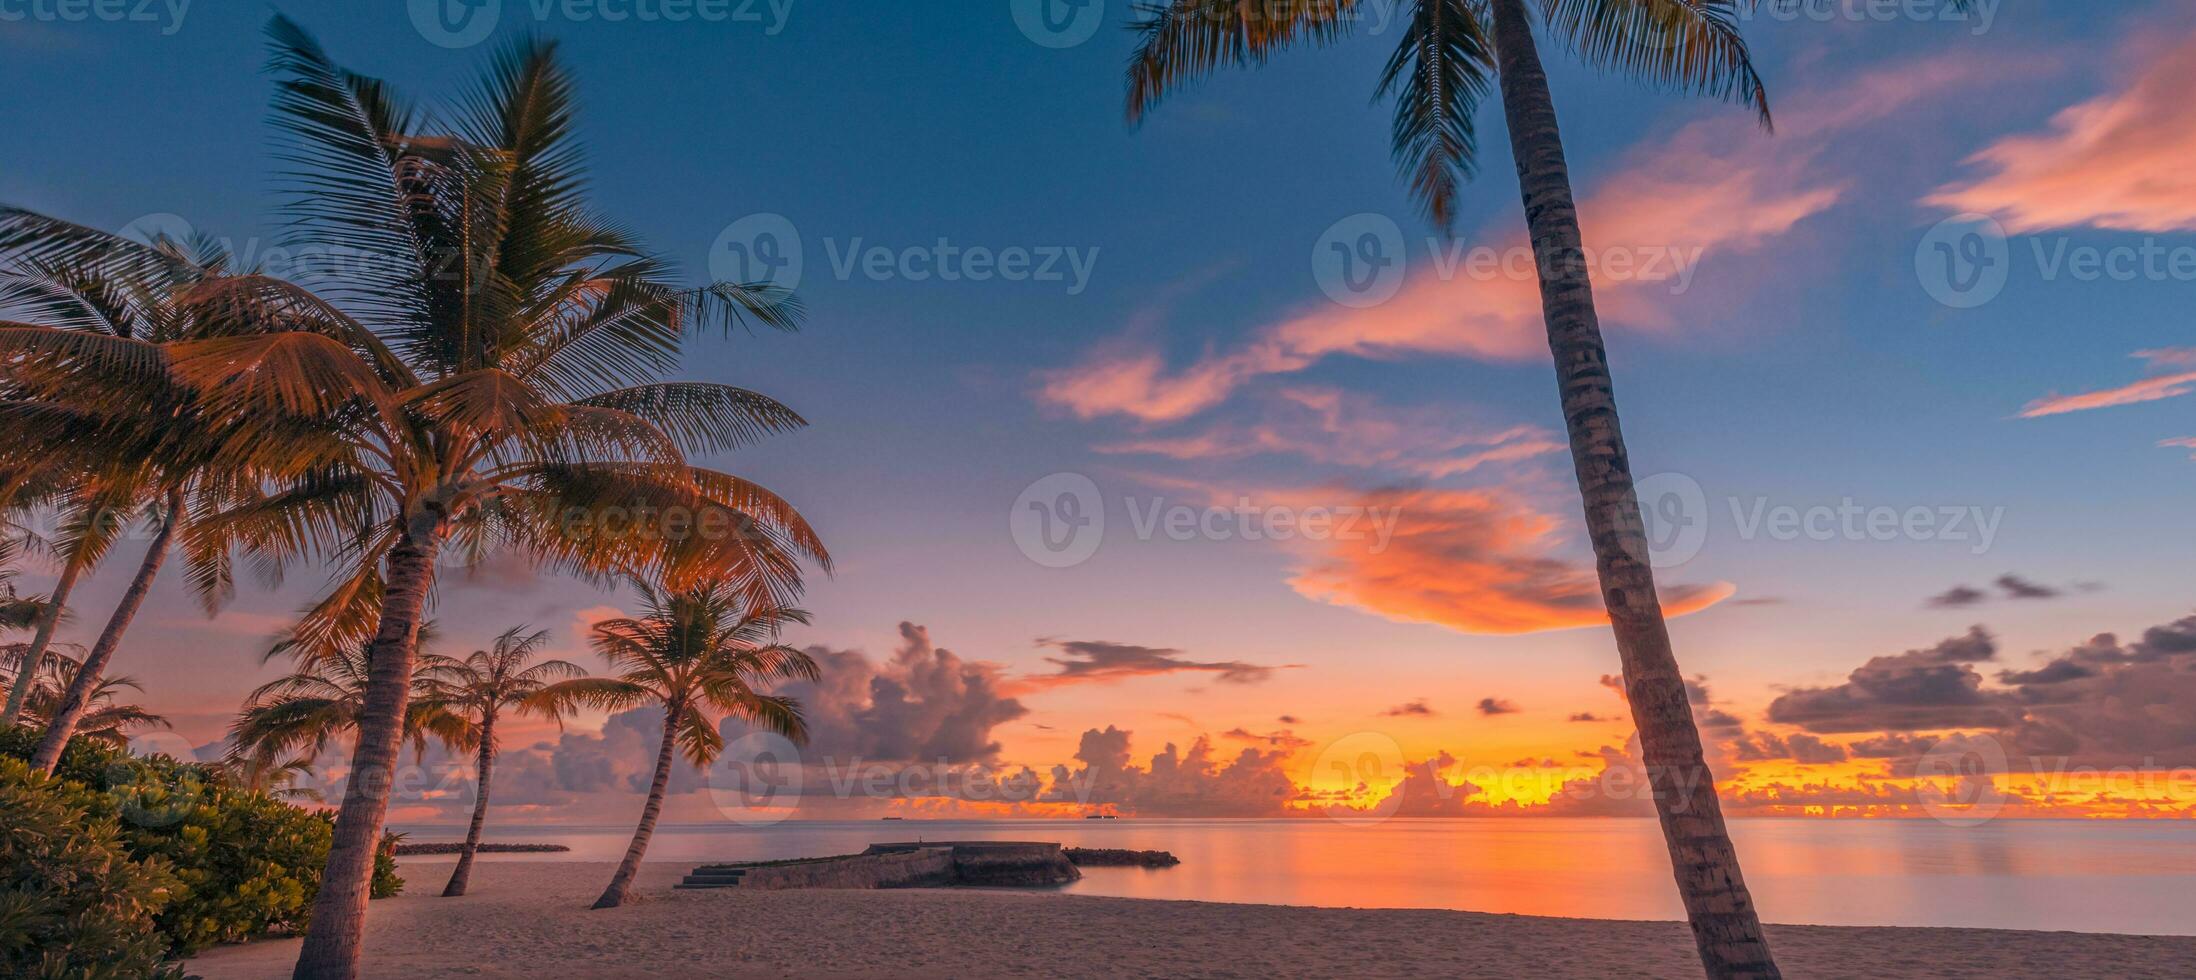 Landscape of paradise tropical island beach, sunrise sunset view. Exotic scenery, palm trees, soft sand and calm sea. Summer beach landscape, vacation or tropical travel sunset colors clouds horizon photo